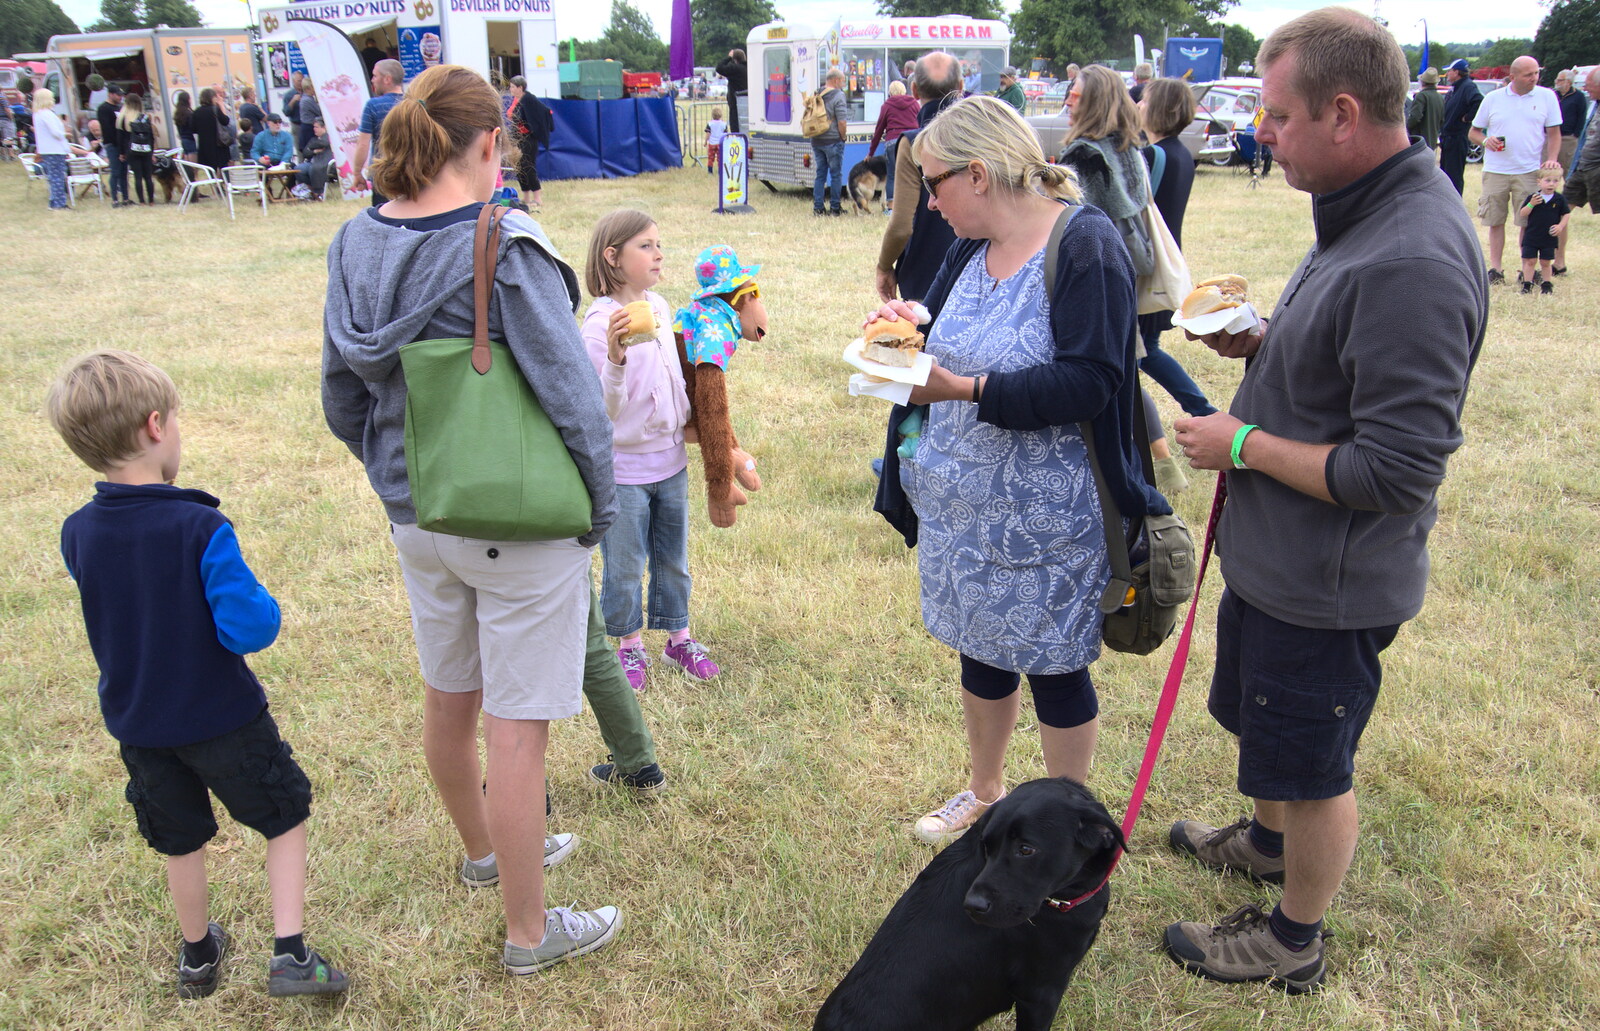 We meet up with Tilly Dog from The Formerly-Known-As-The-Eye-Show, Palgrave, Suffolk - 17th June 2018